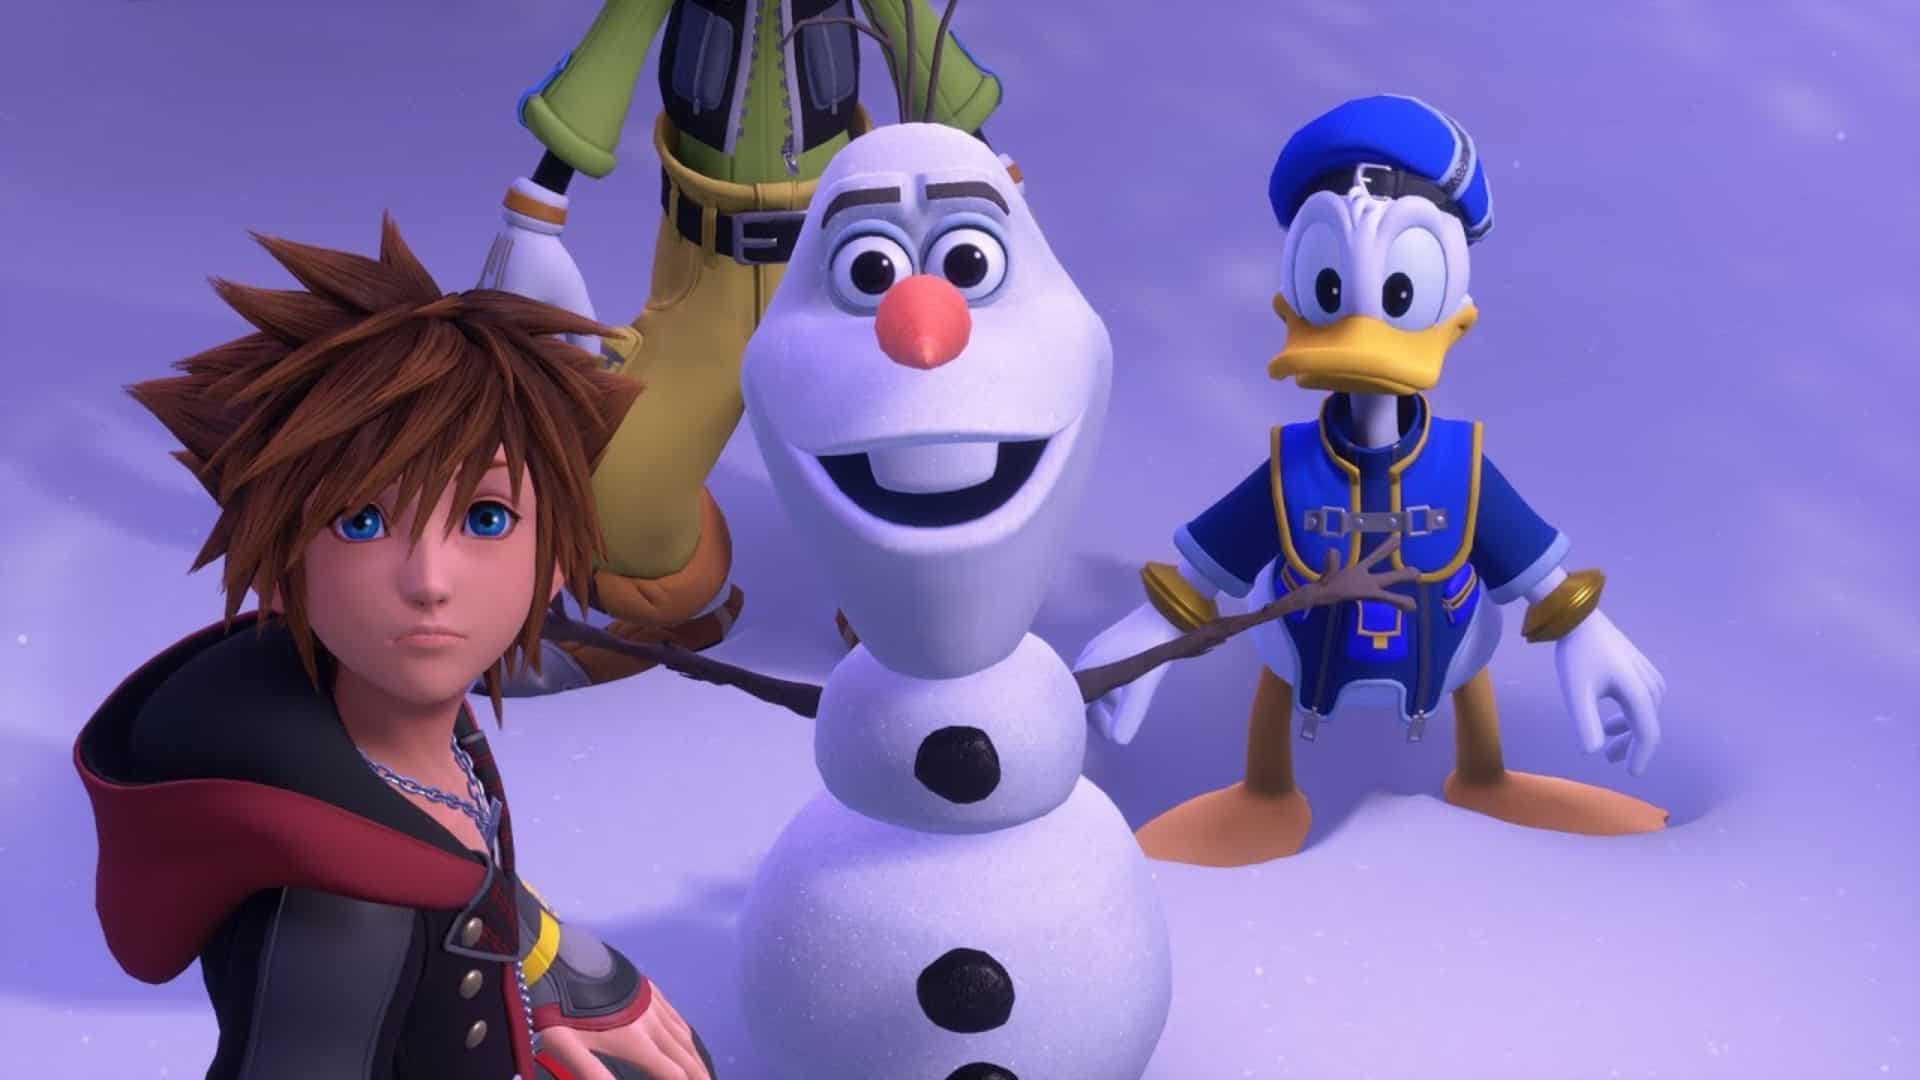 An official promotional image for Kingdom Hearts III.